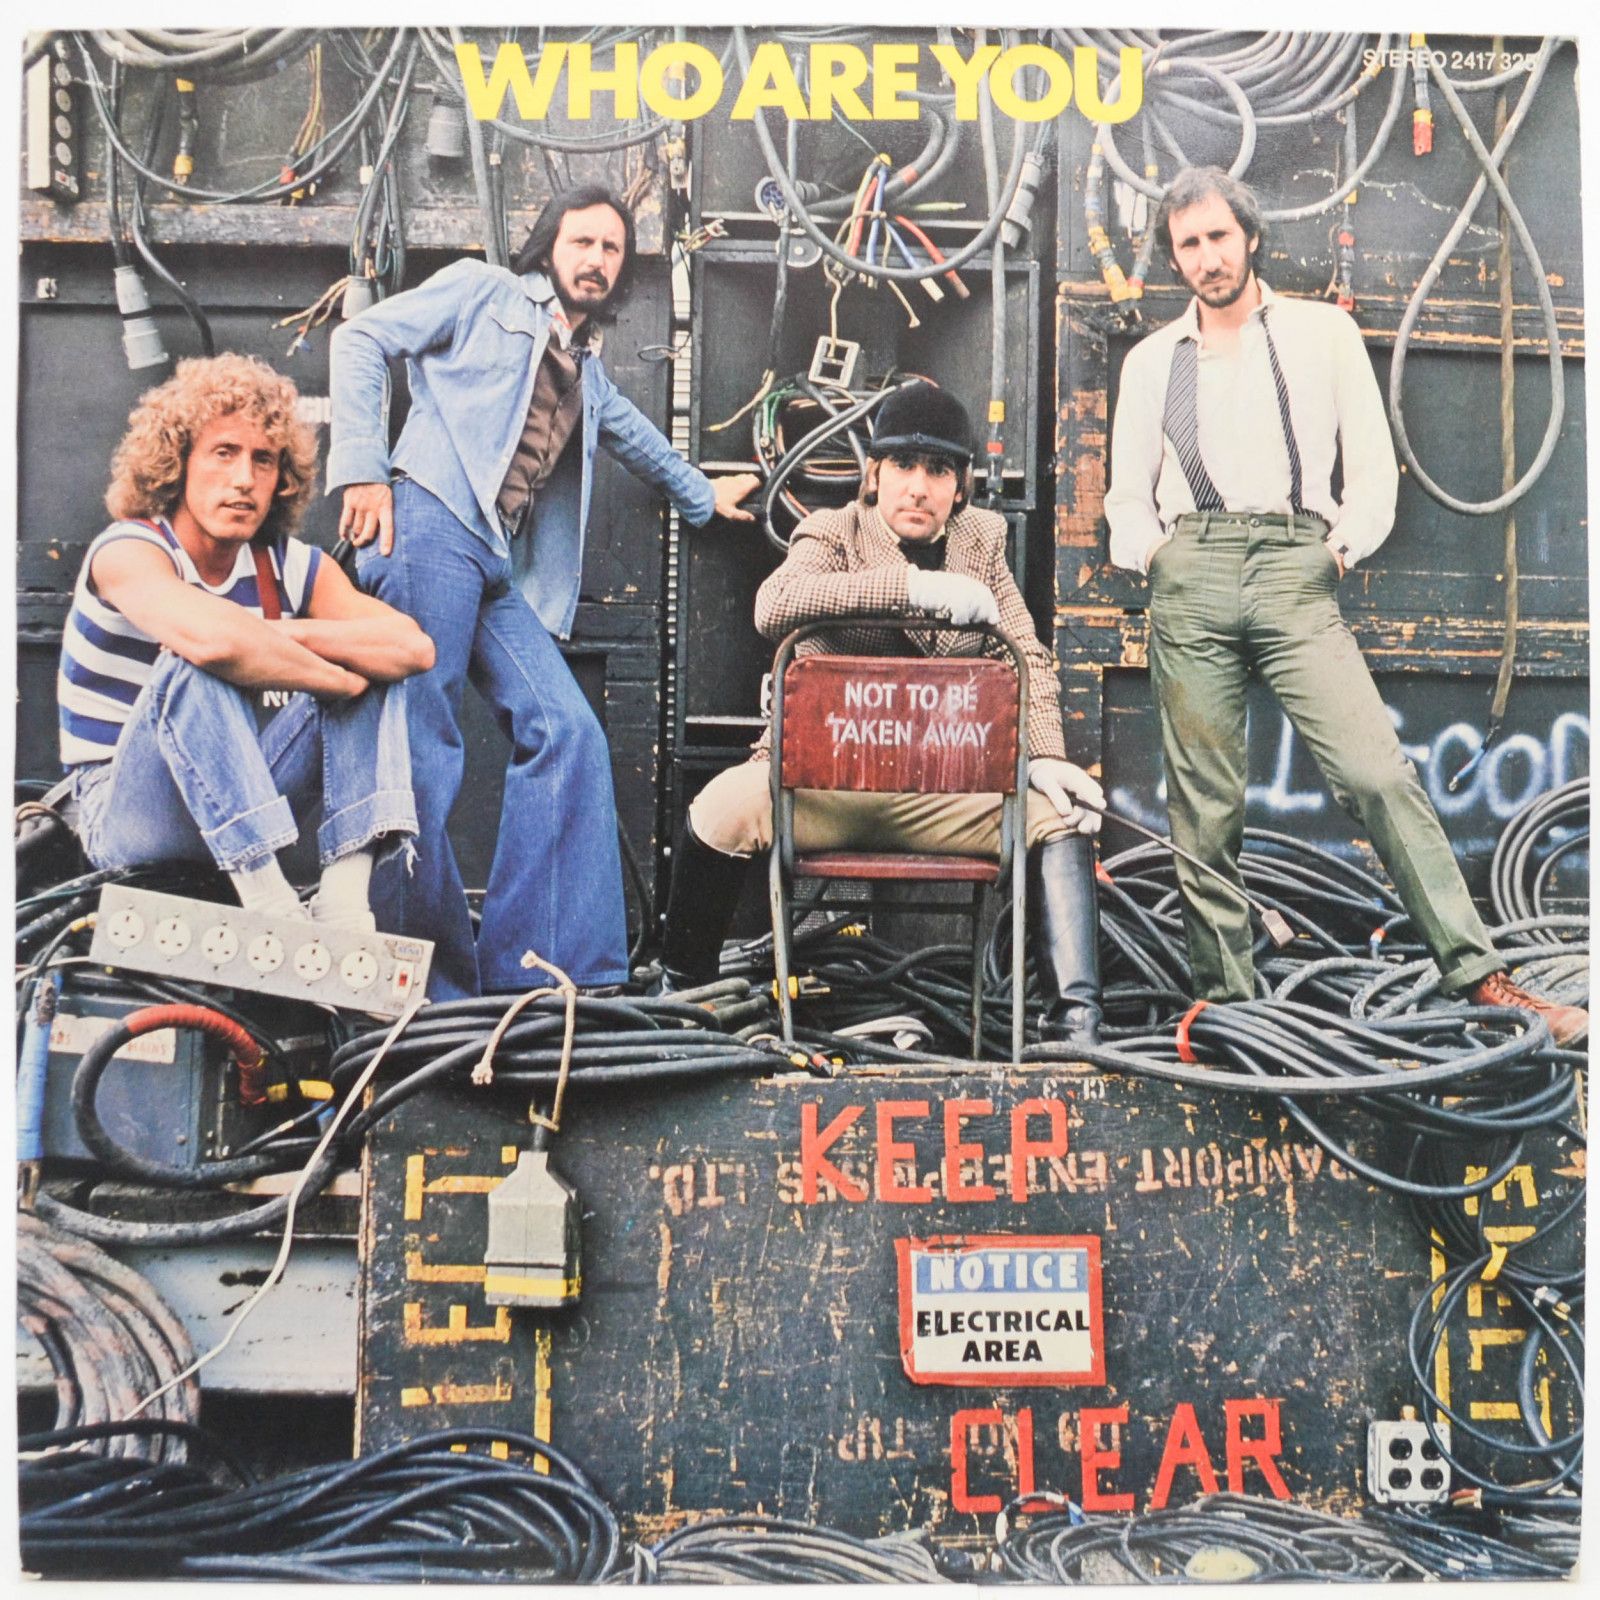 Who — Who Are You, 1978